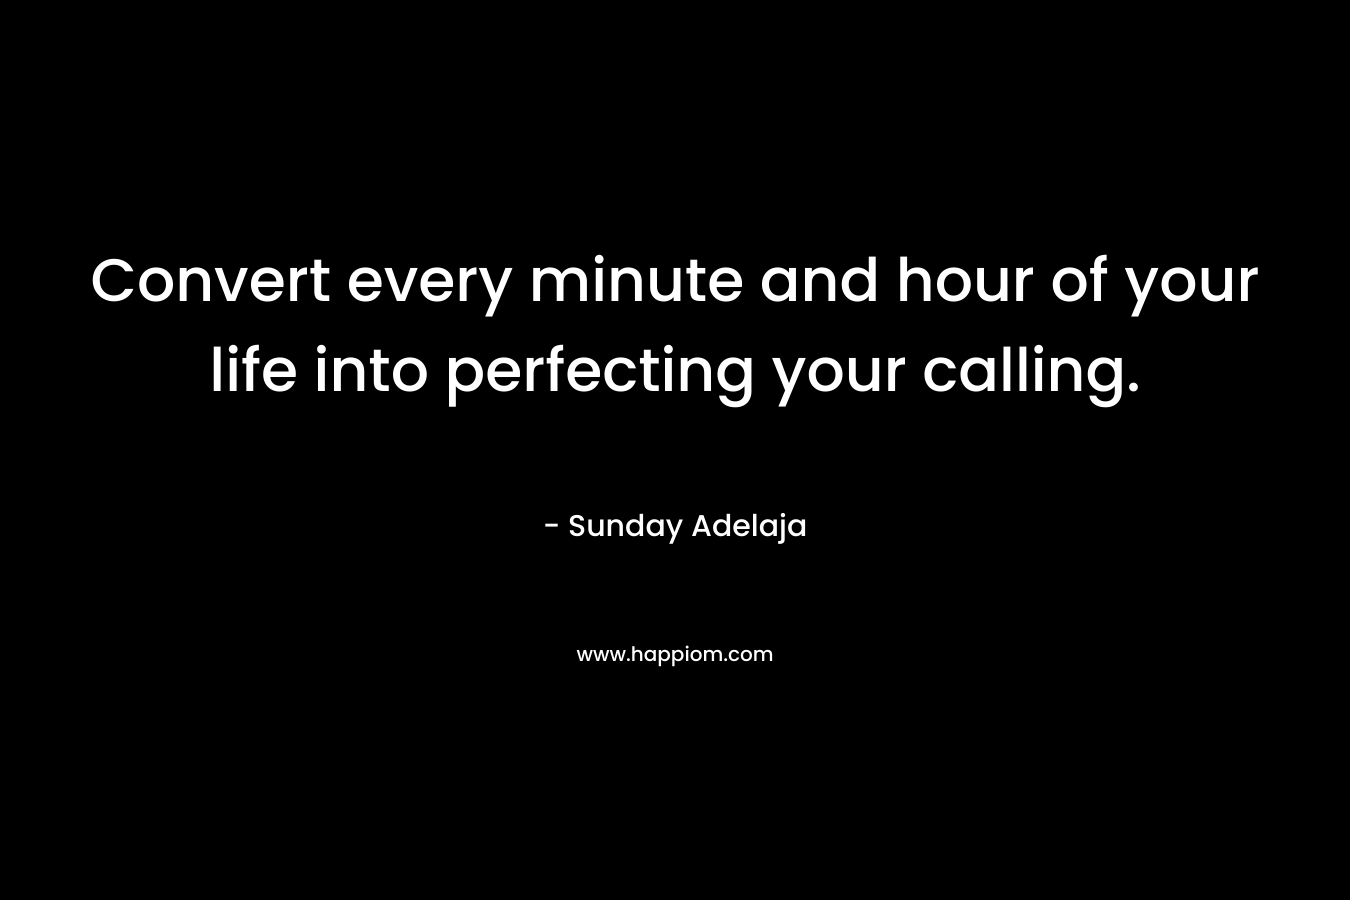 Convert every minute and hour of your life into perfecting your calling.